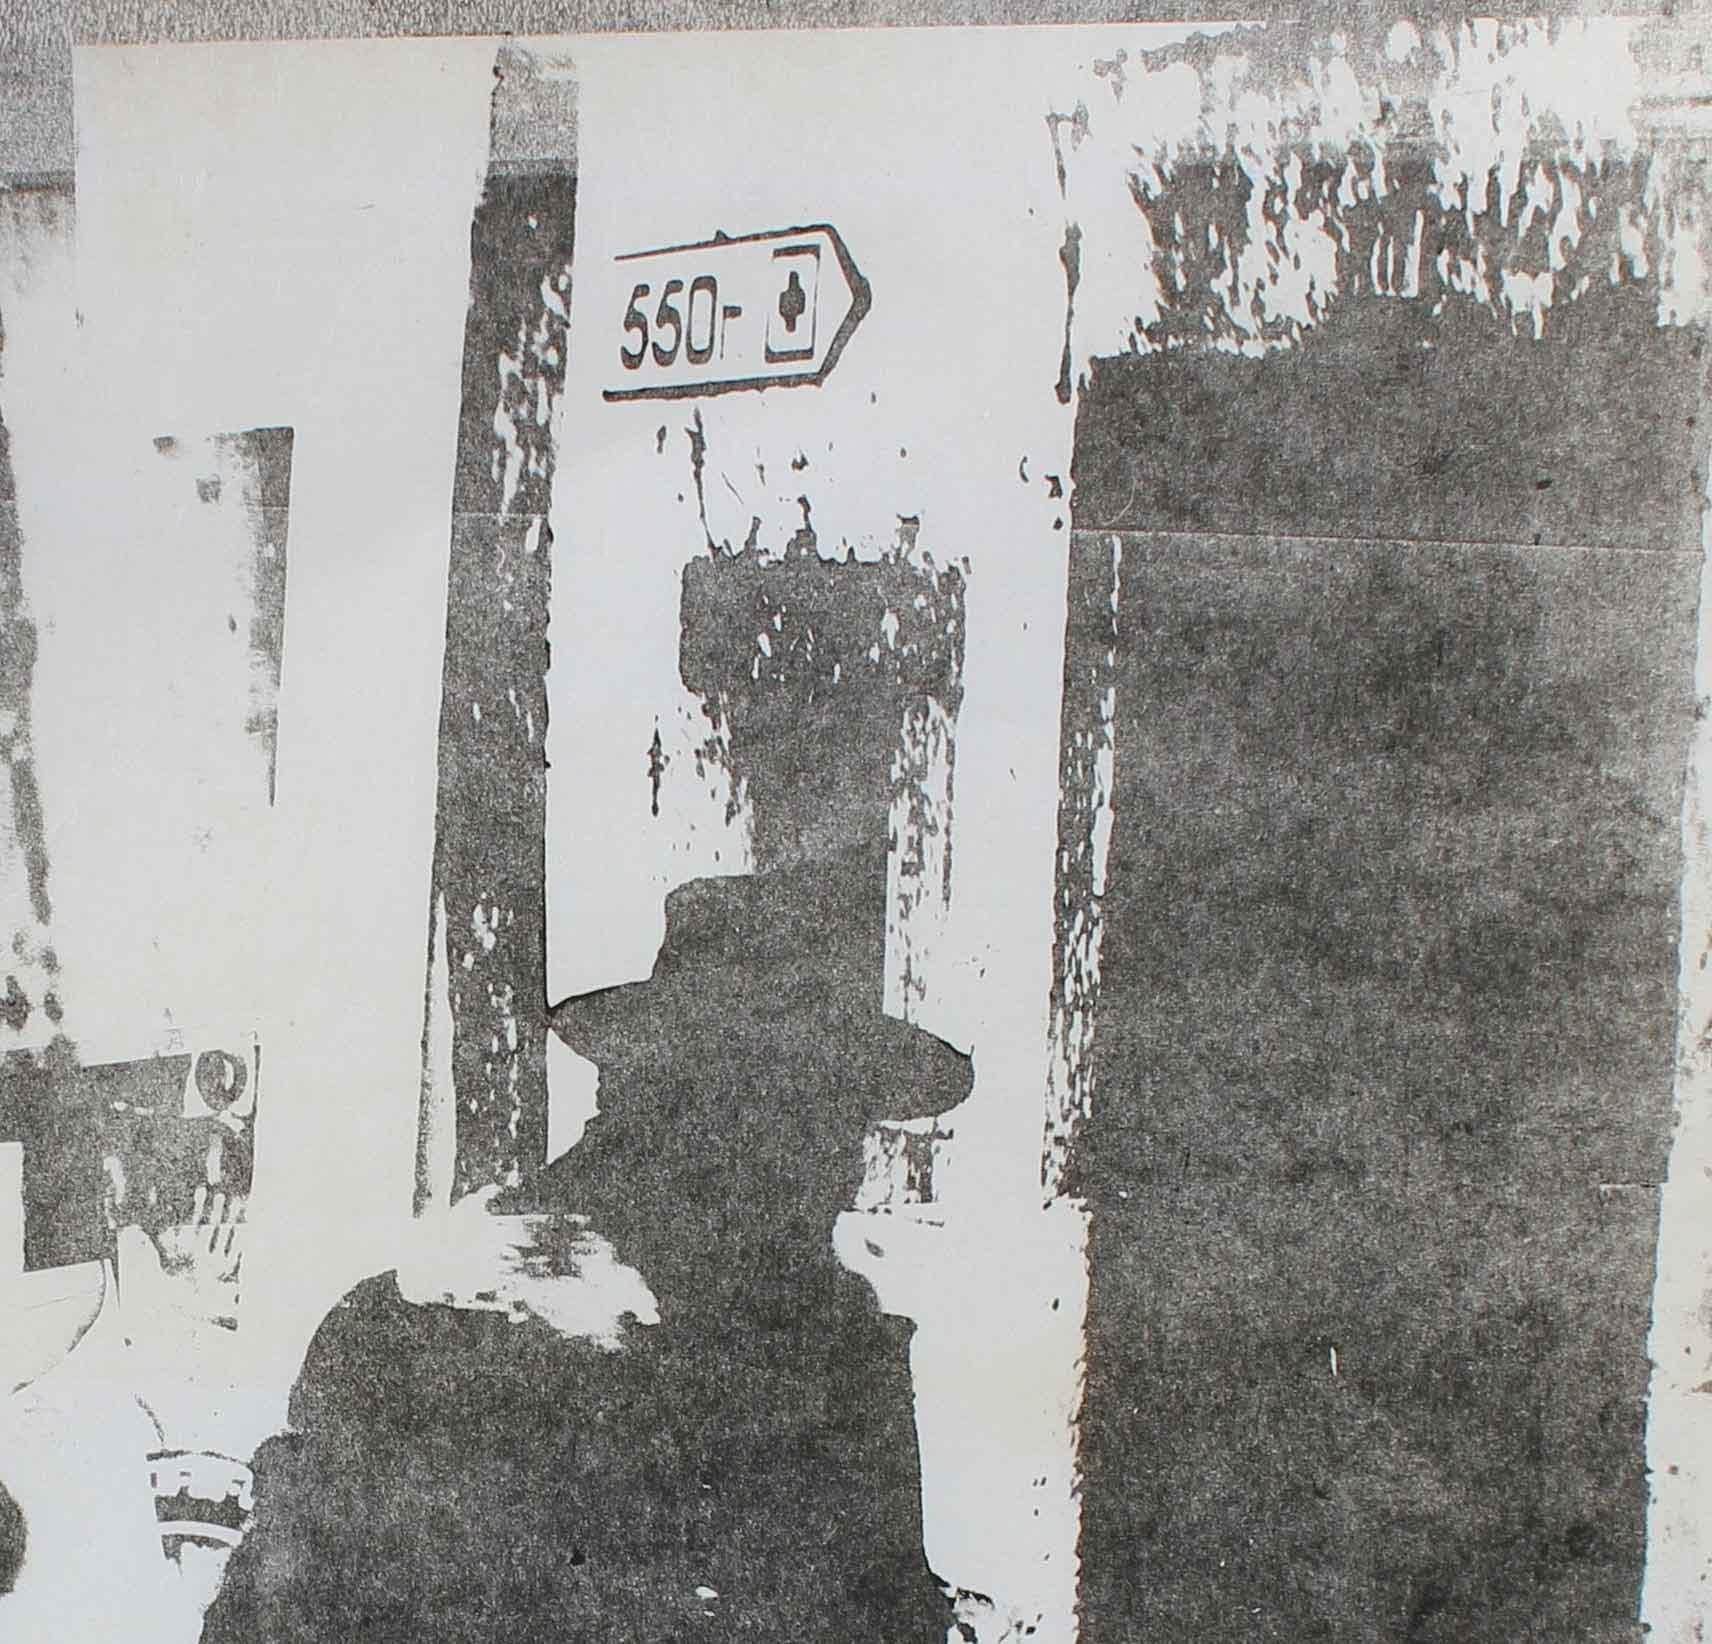 Men with Hats in Cityscape, Photo Emulsion Print, Circa 1970s - Gray Portrait Print by Barbara Lewis